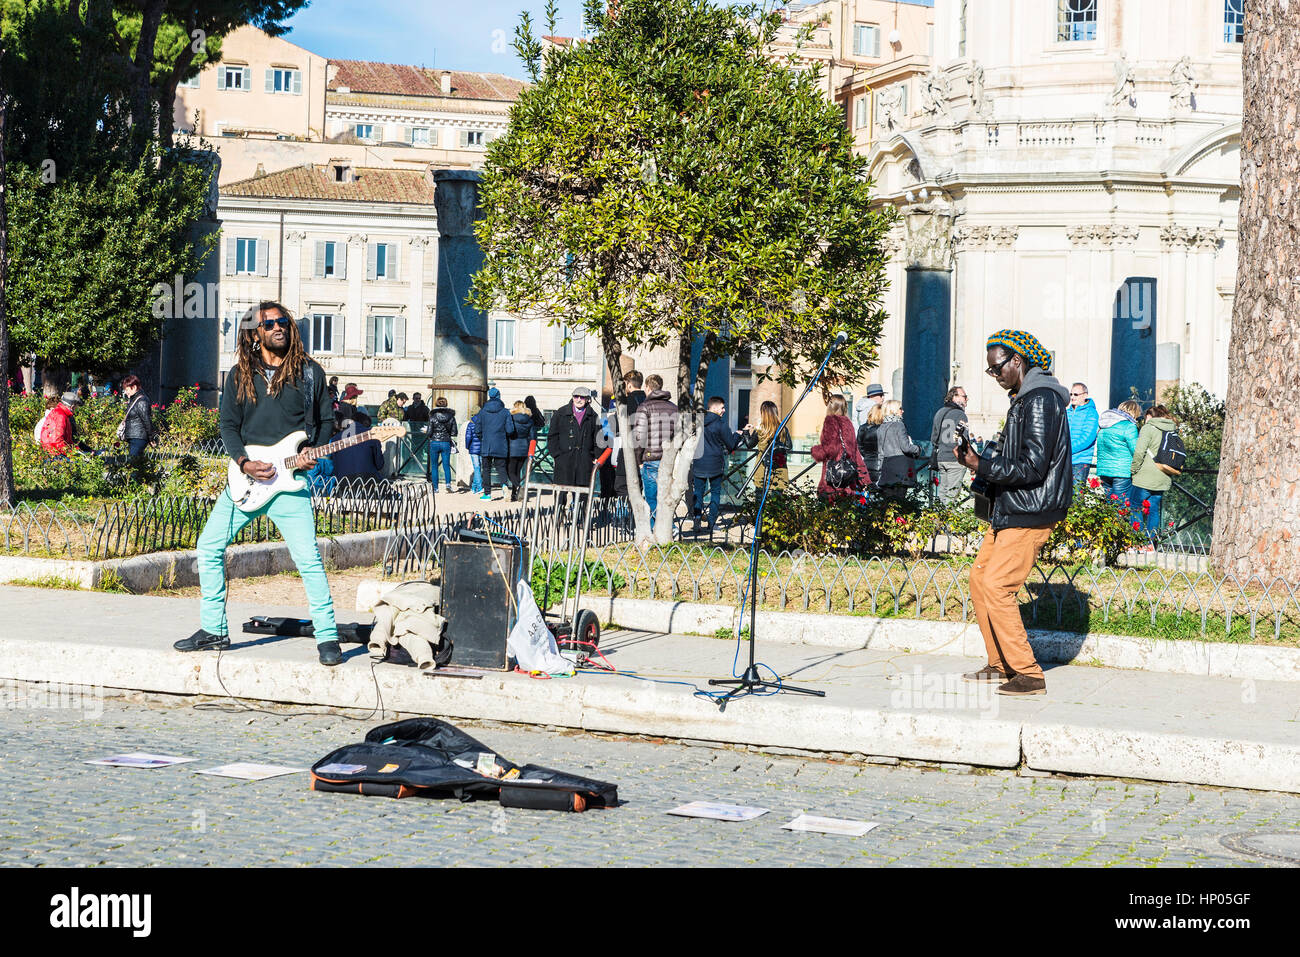 Rome, Italy - December 31, 2016: Two street musicians of rasta origin singing and playing electric guitar in the historical center of Rome Stock Photo